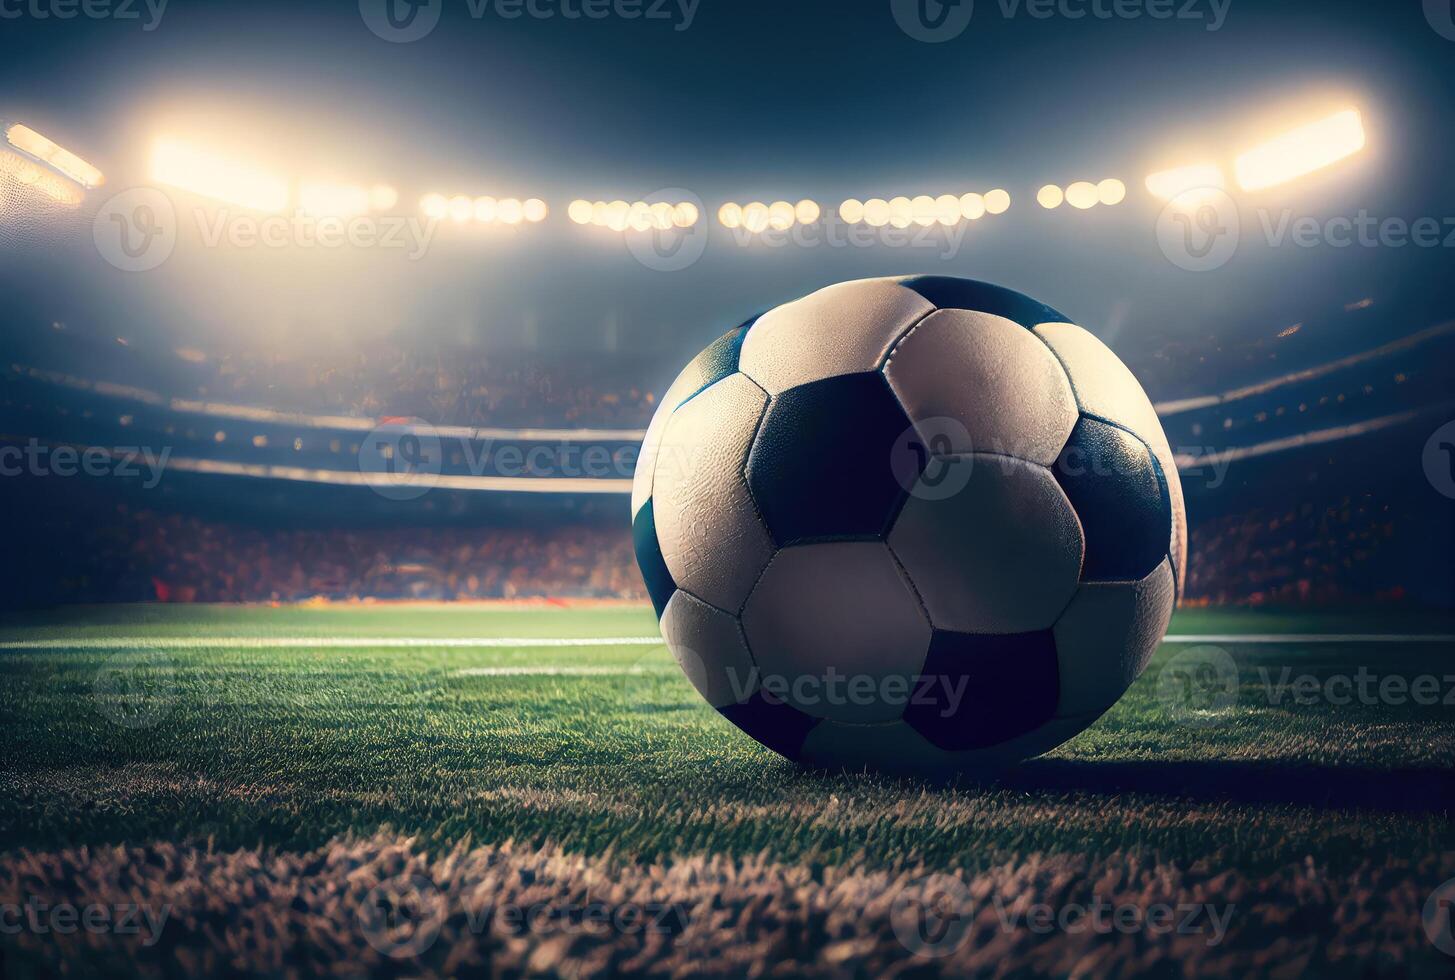 Soccer ball on grass field in stadium. Sport and game concept. photo